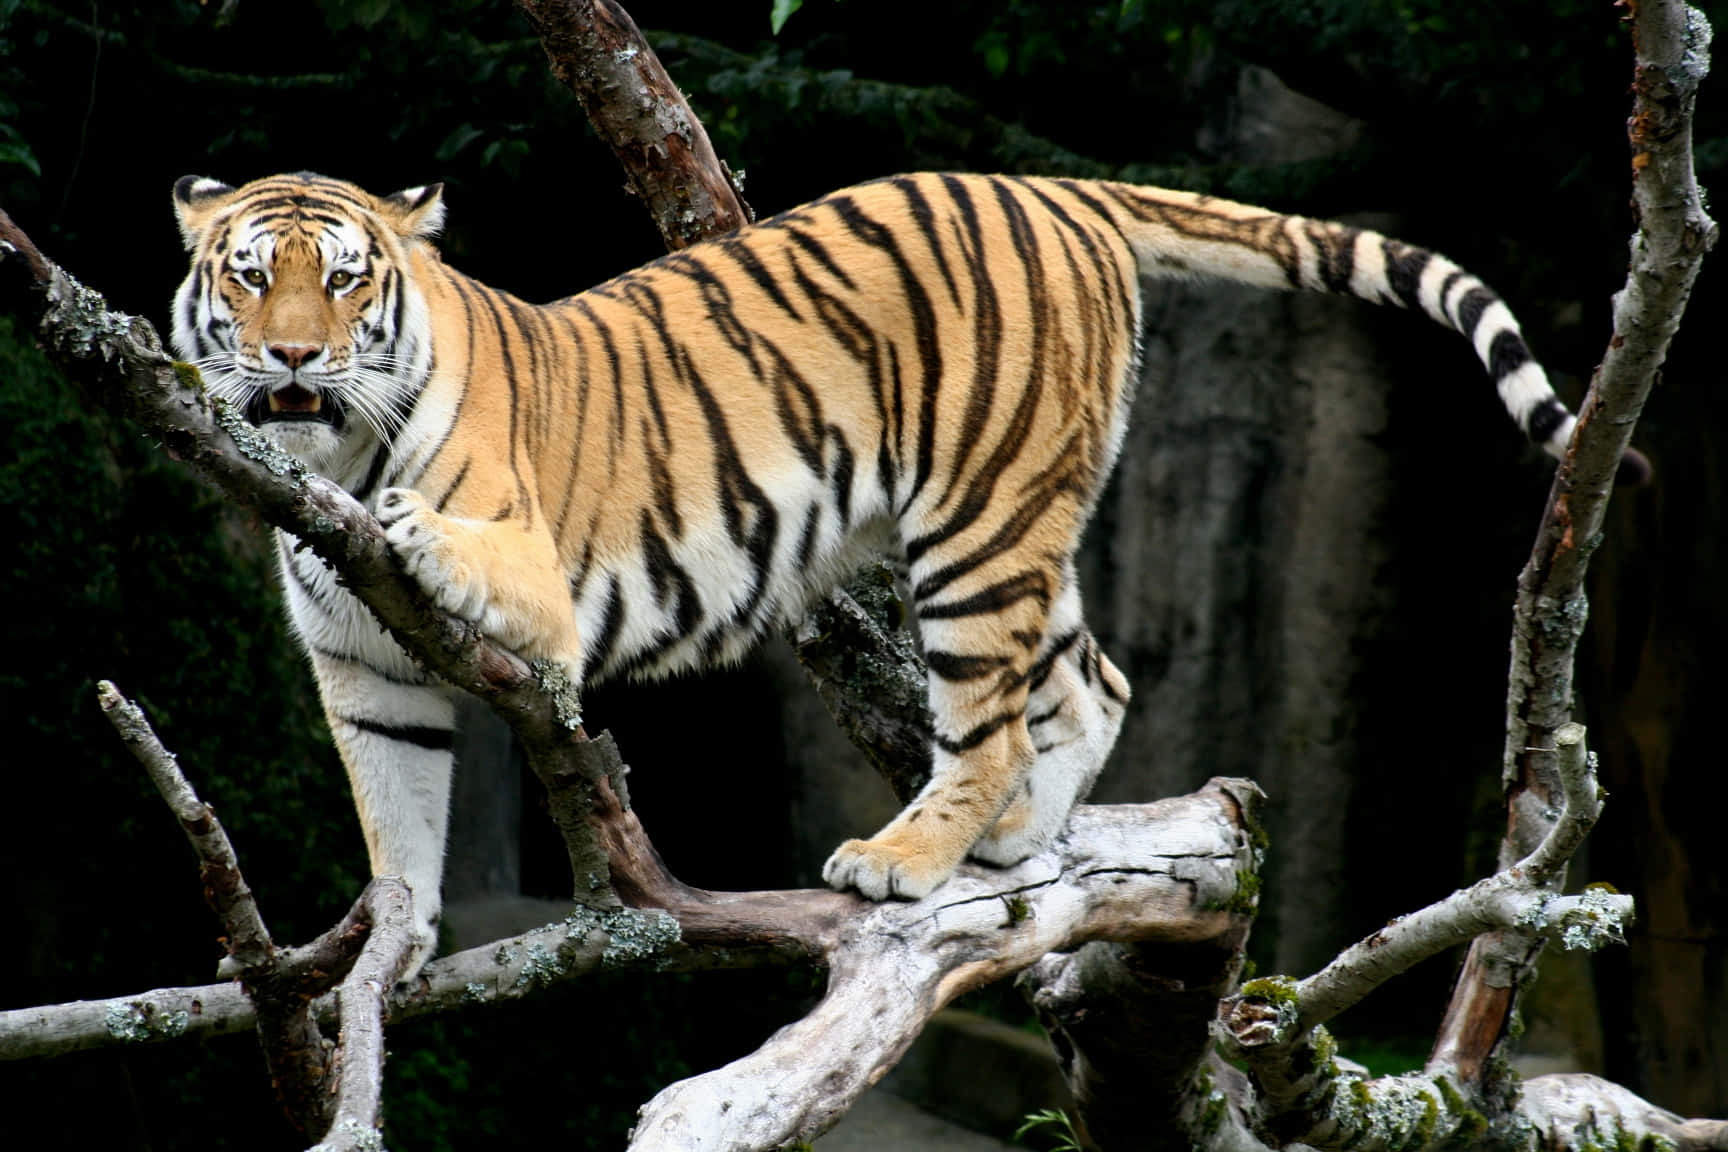 A beautiful Bengal tiger lounging atop a rock in the wild.